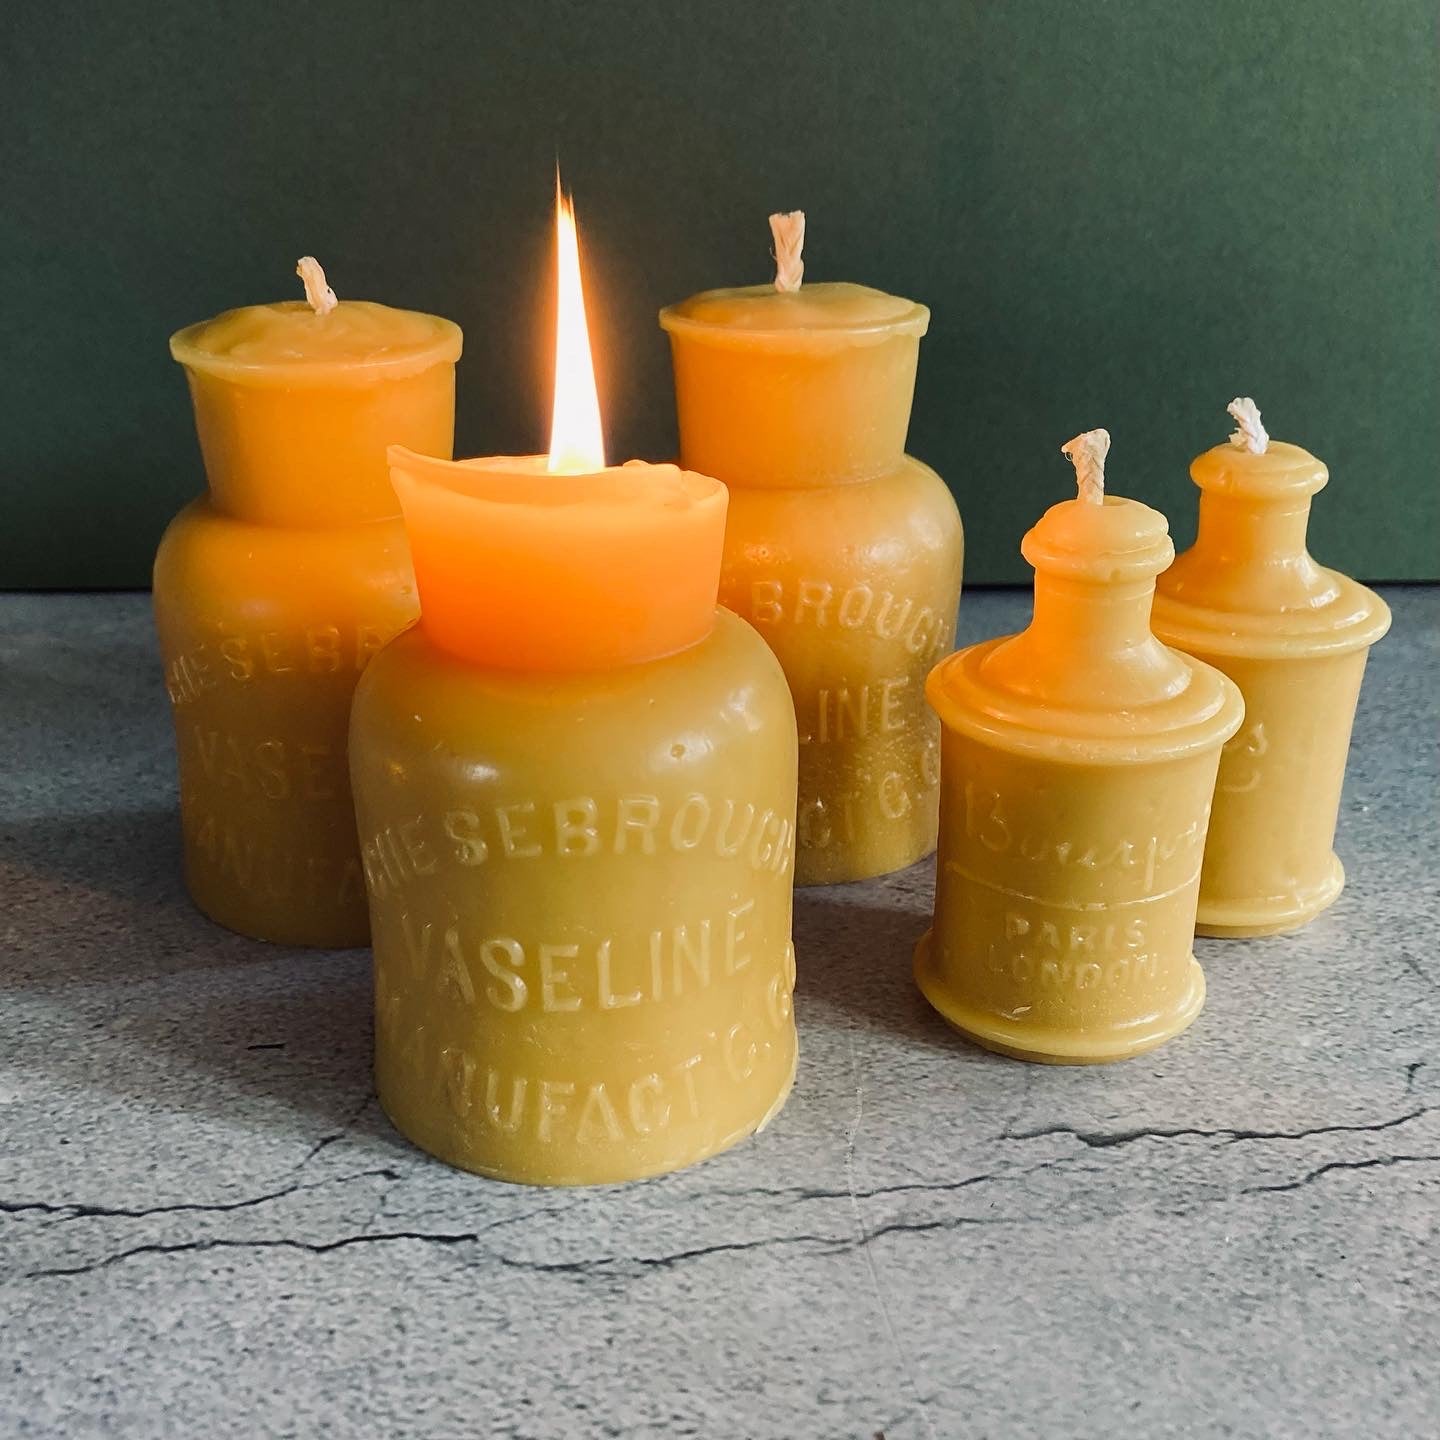 Handmade Beeswax Candles in Antique Bottle Designs